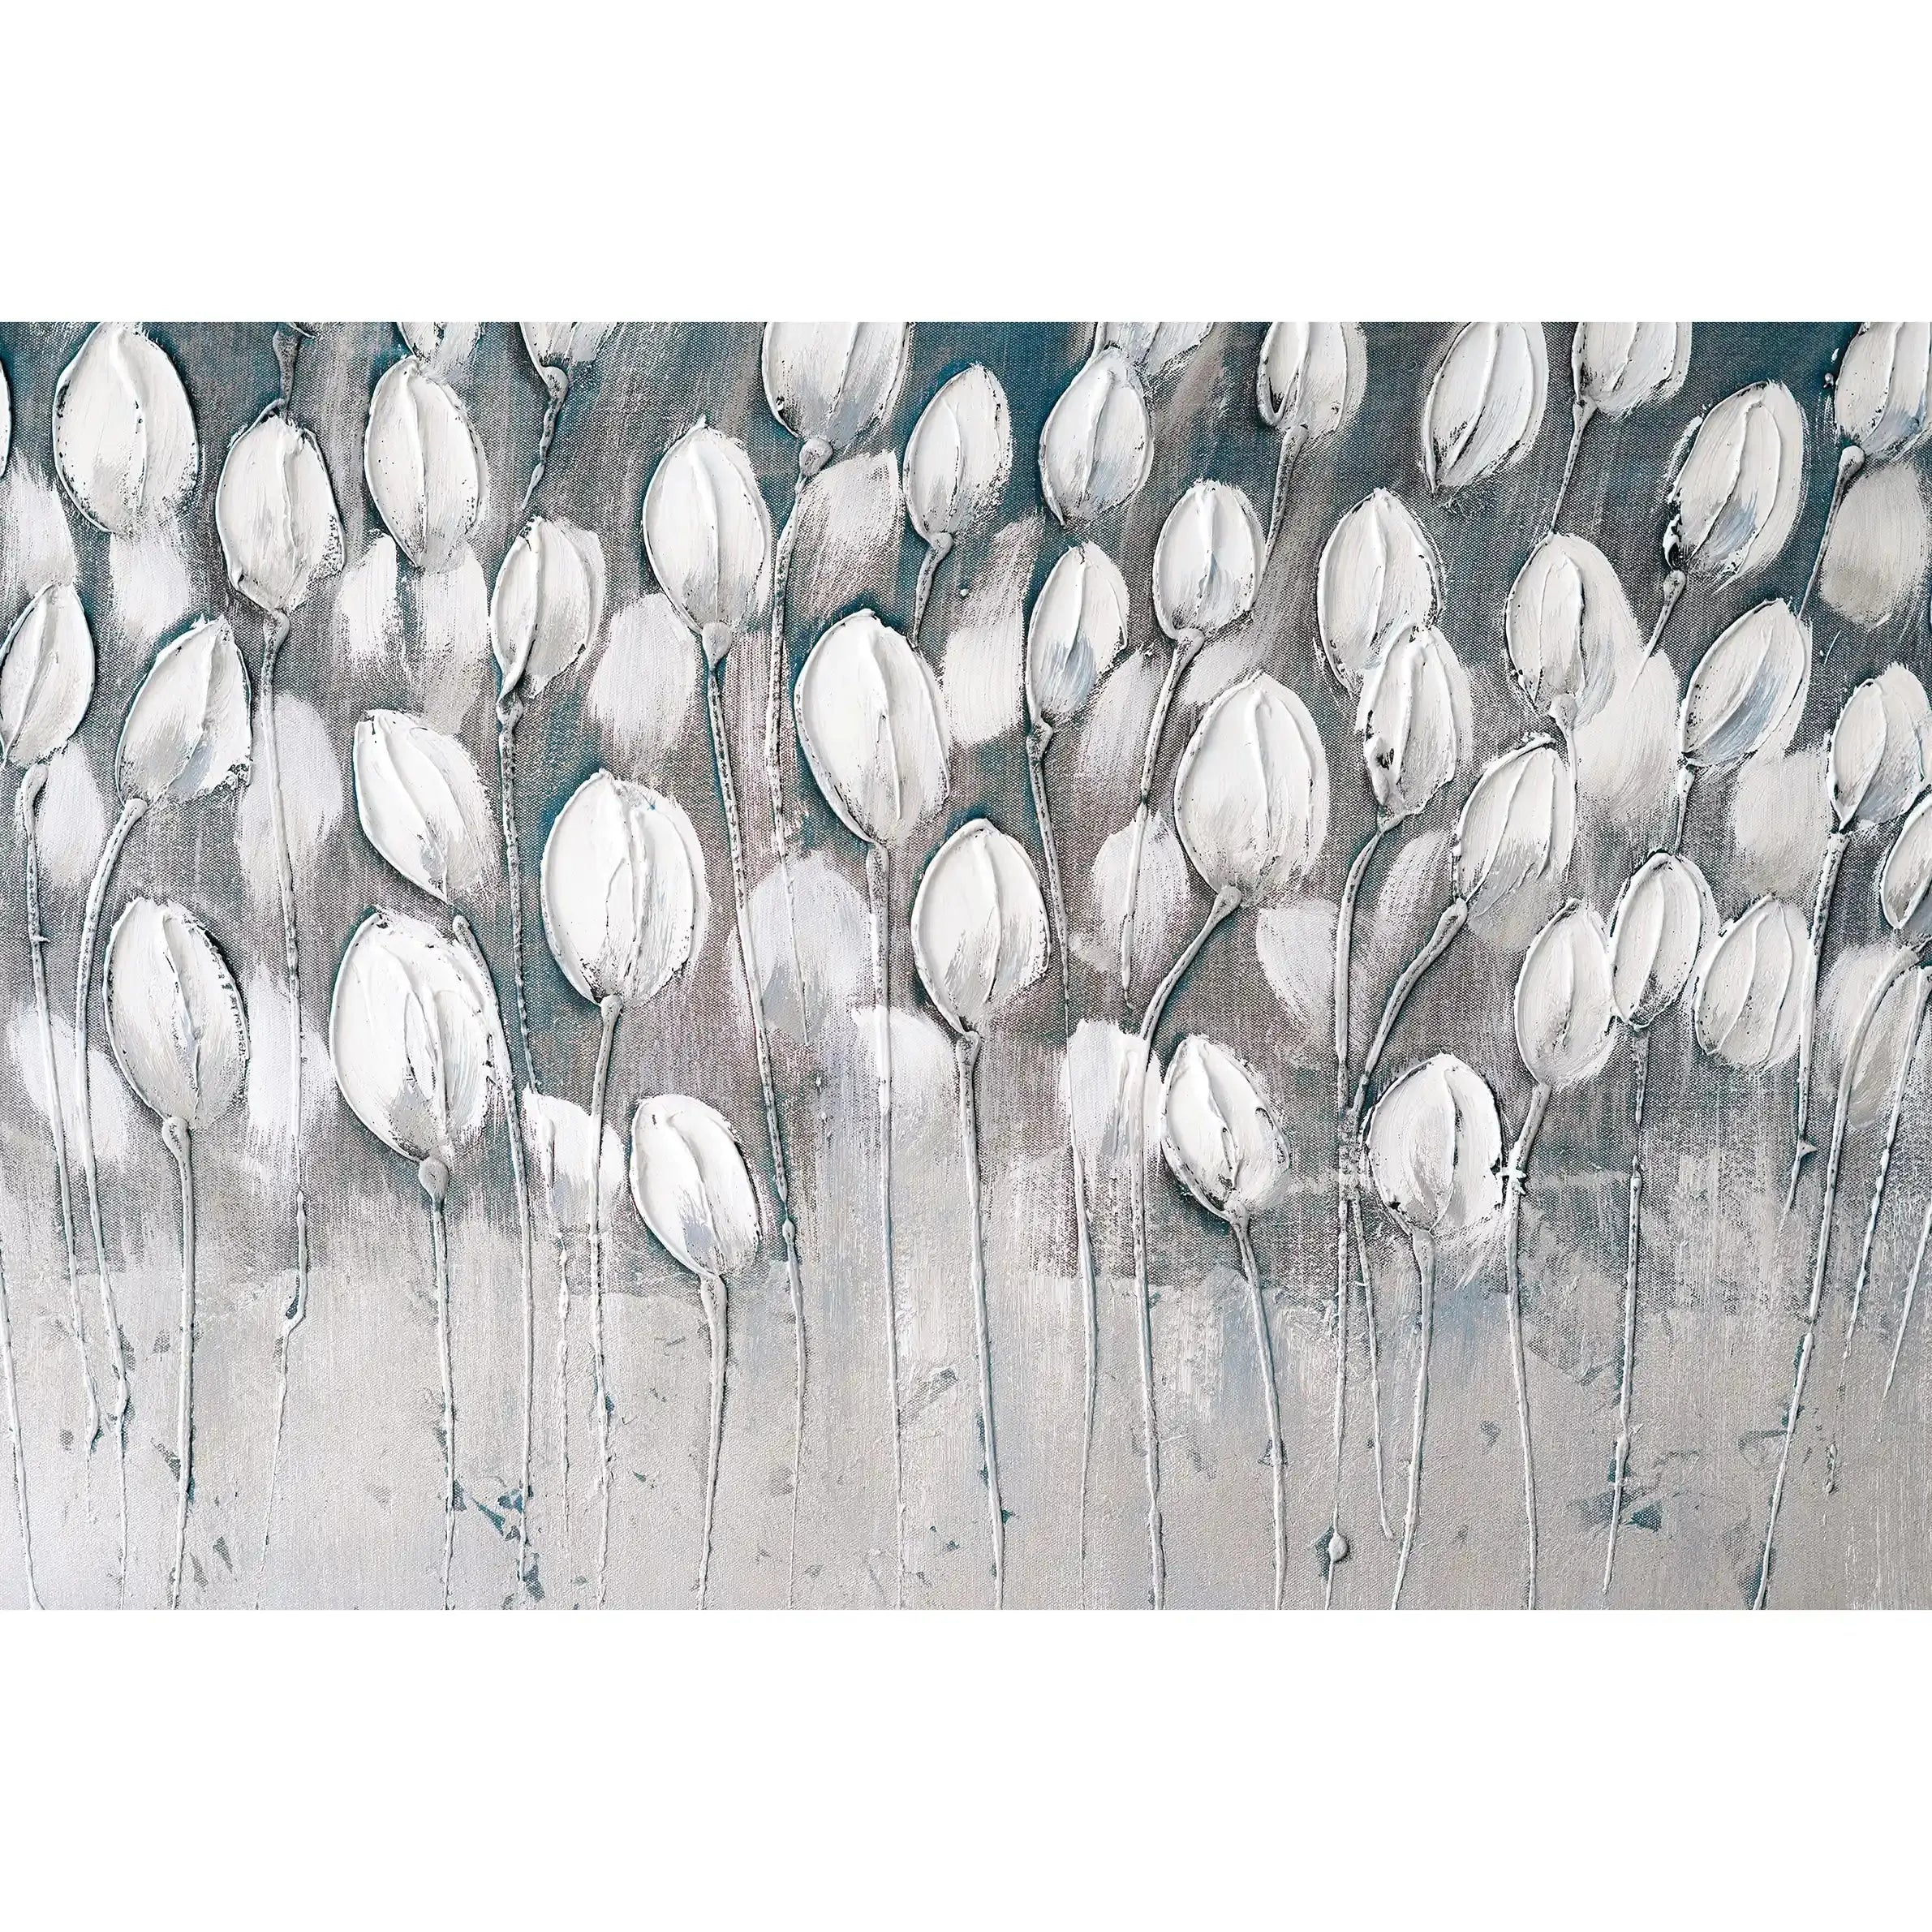 3008-A / Peel and Stick Wallpaper Floral: Silver and White Tulips Design, Perfect Wall Decor for Bathroom and Bedroom - Artevella